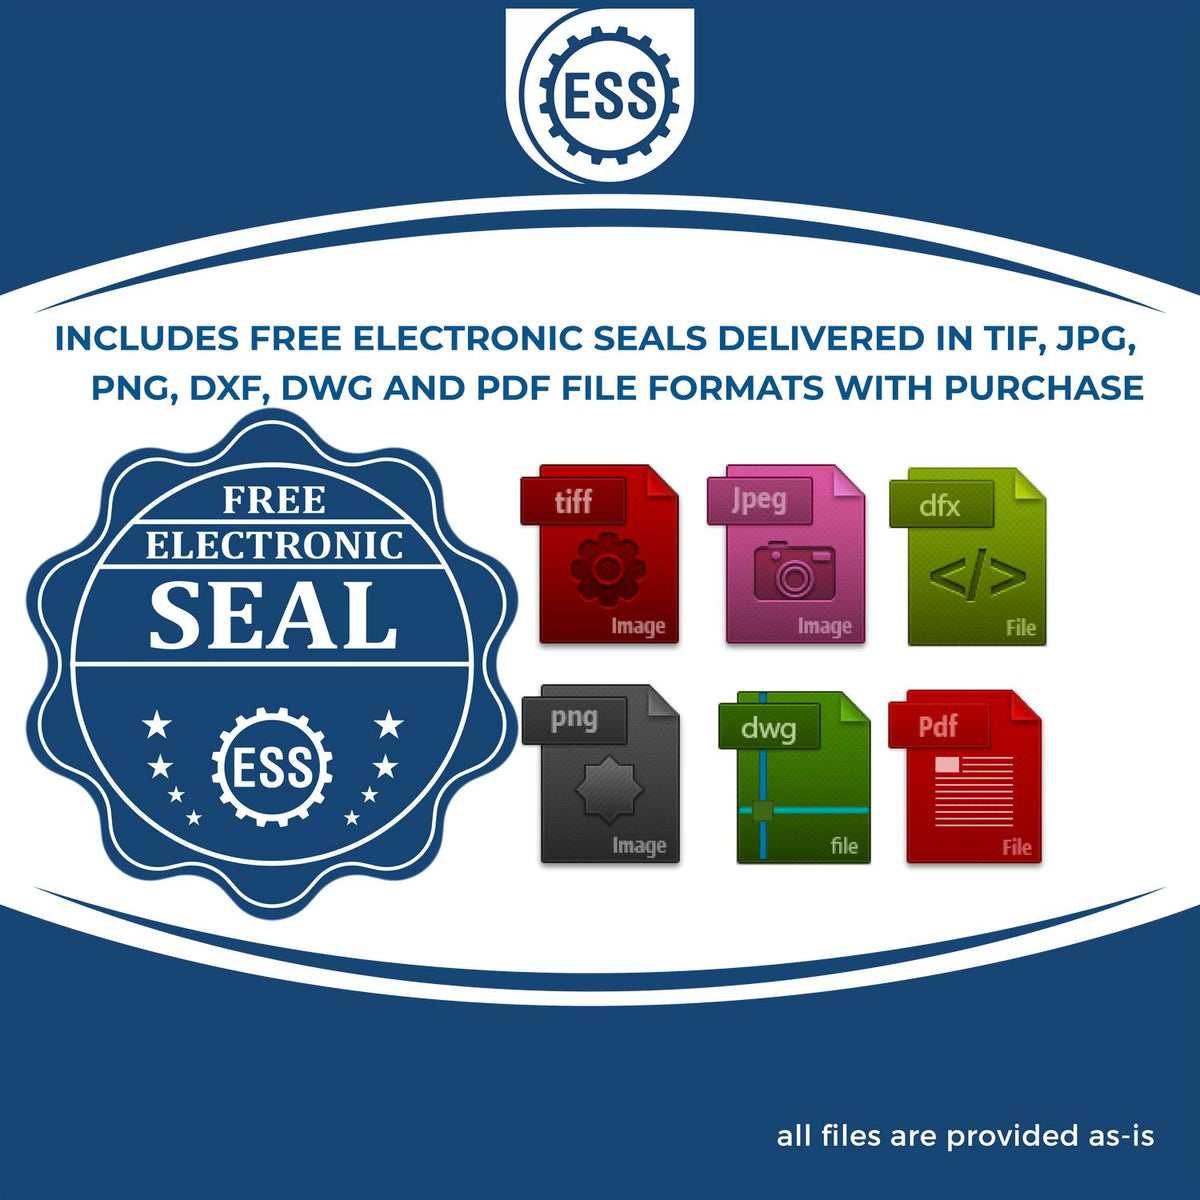 An infographic for the free electronic seal for the Delaware Professional Engineer Seal Stamp illustrating the different file type icons such as DXF, DWG, TIF, JPG and PNG.